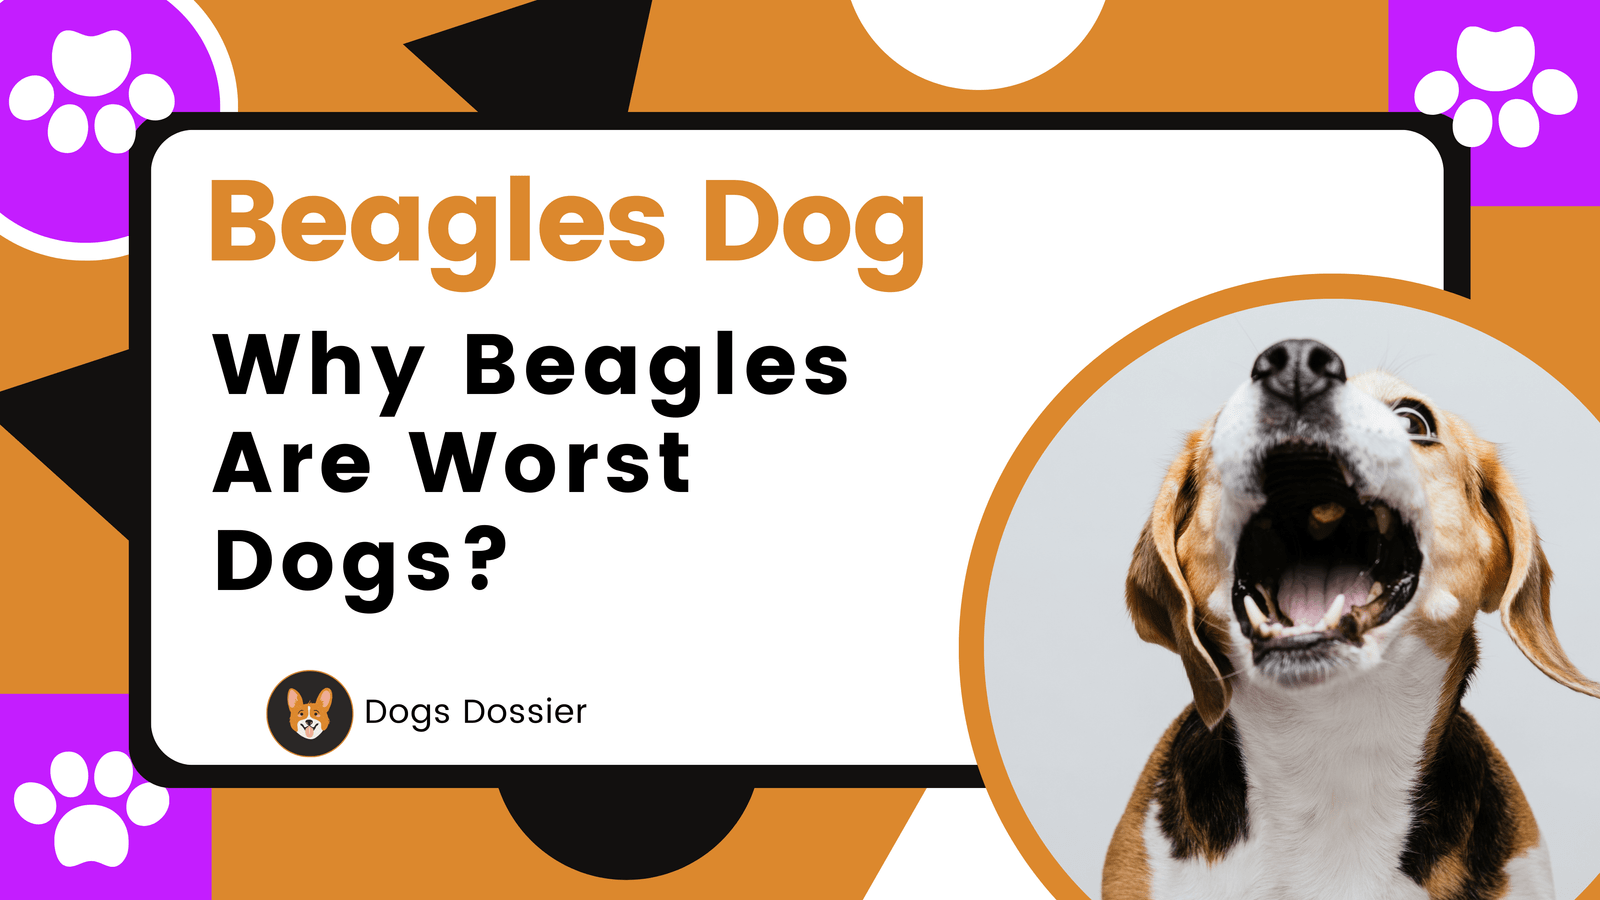 Why Beagles are Worst Dogs?